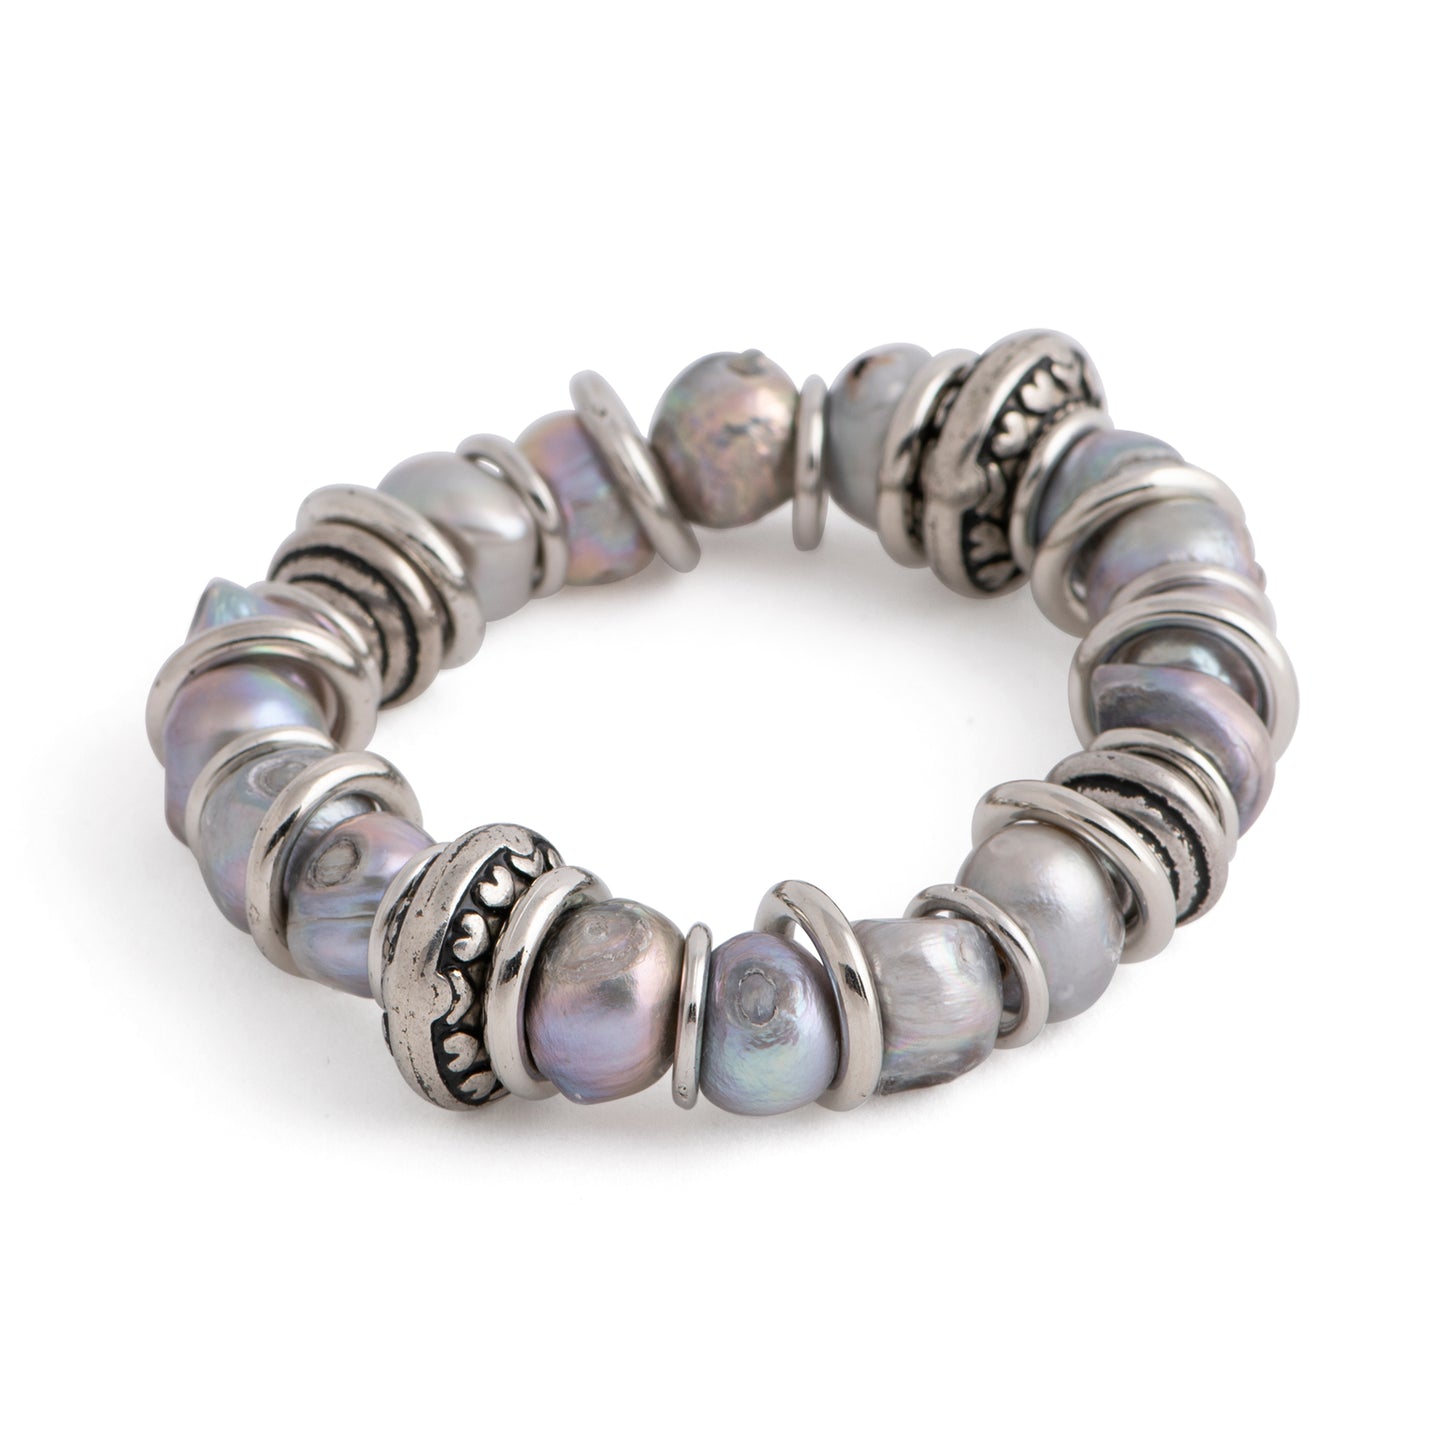 Madeira - Freshwater pearl stretch bracelet with charm (Silver pearls)